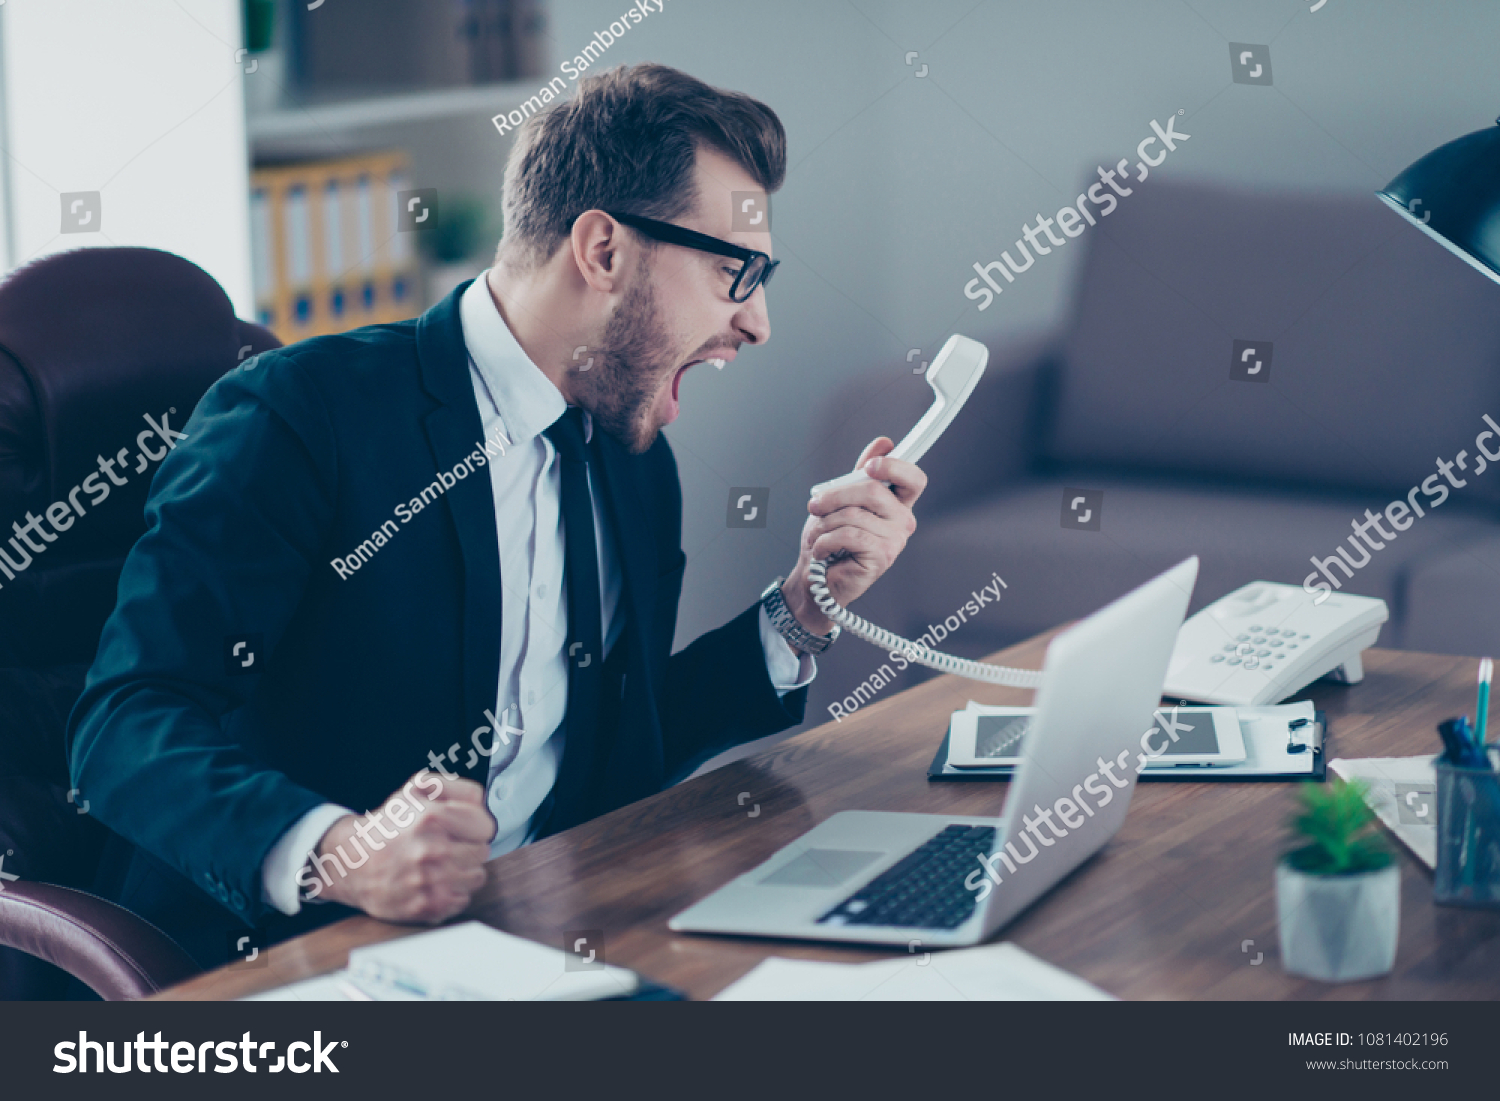 Corporate mad people yell authority tell speak with staff people person concept. Side profile view portrait of disappointed tired busy sad upset agent financier shouting on receiver in his hand #1081402196